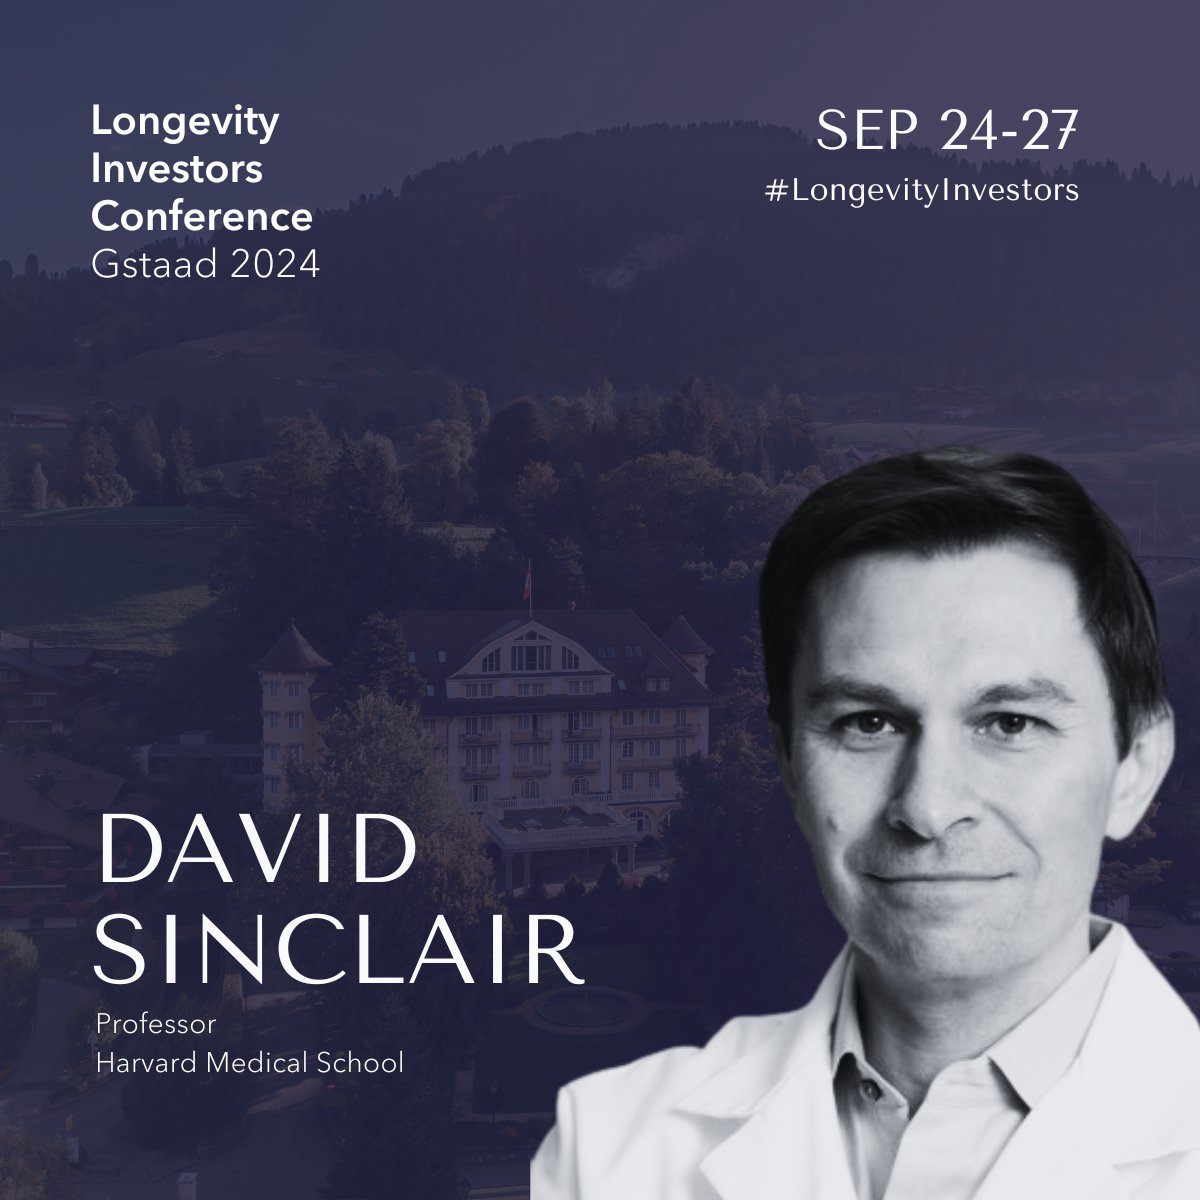 🌟 Exciting News! 🌟 Thrilled to announce that @davidasinclair, renowned longevity researcher and Professor at @davidasinclair, will be joining the lineup of speakers at the Longevity Investors Conference 2024! 🎉 Dr. Sinclair is a trailblazer in the field, known for his